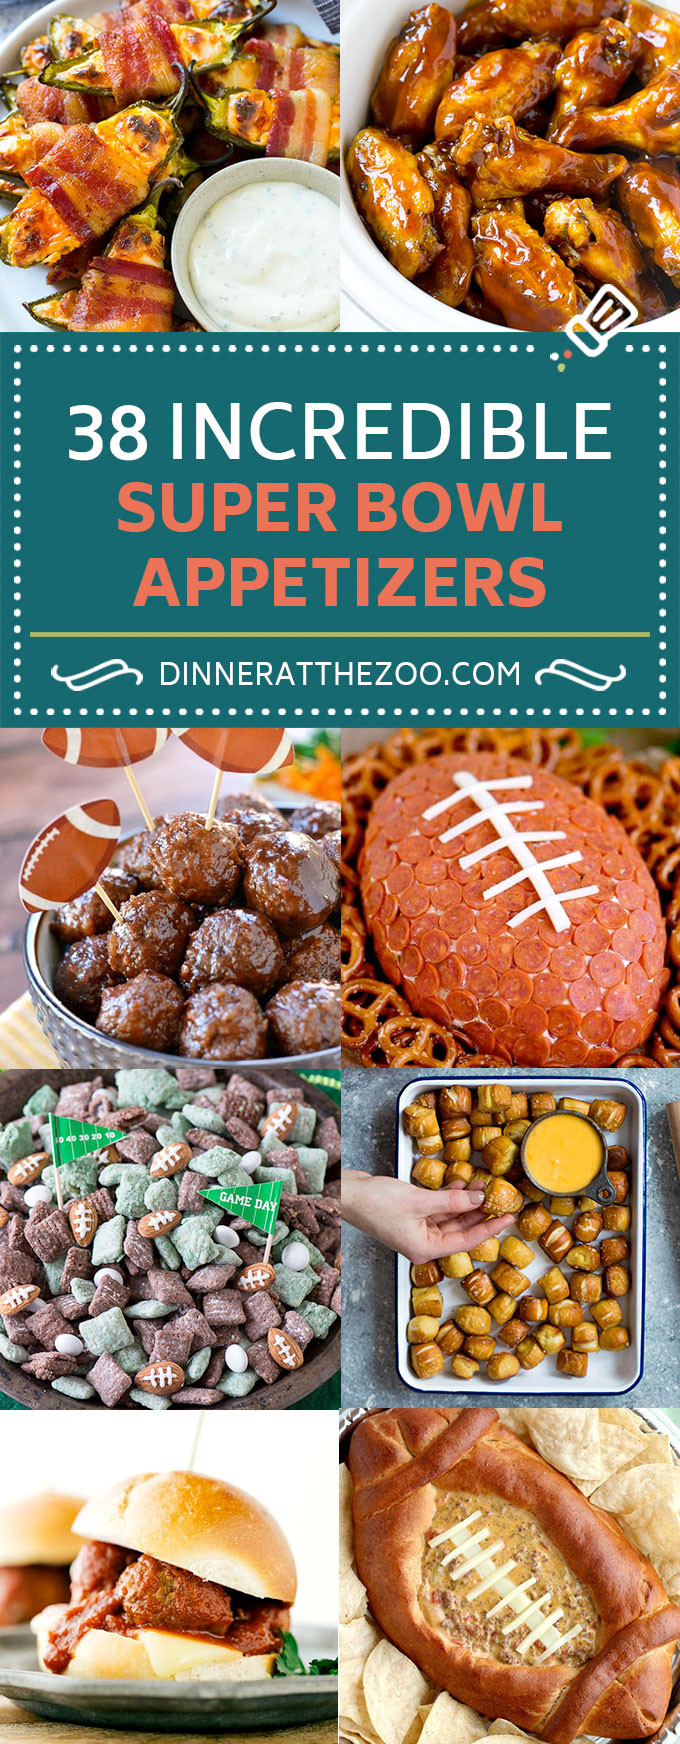 Easy Super Bowl Party Recipes
 45 Incredible Super Bowl Appetizer Recipes Dinner at the Zoo